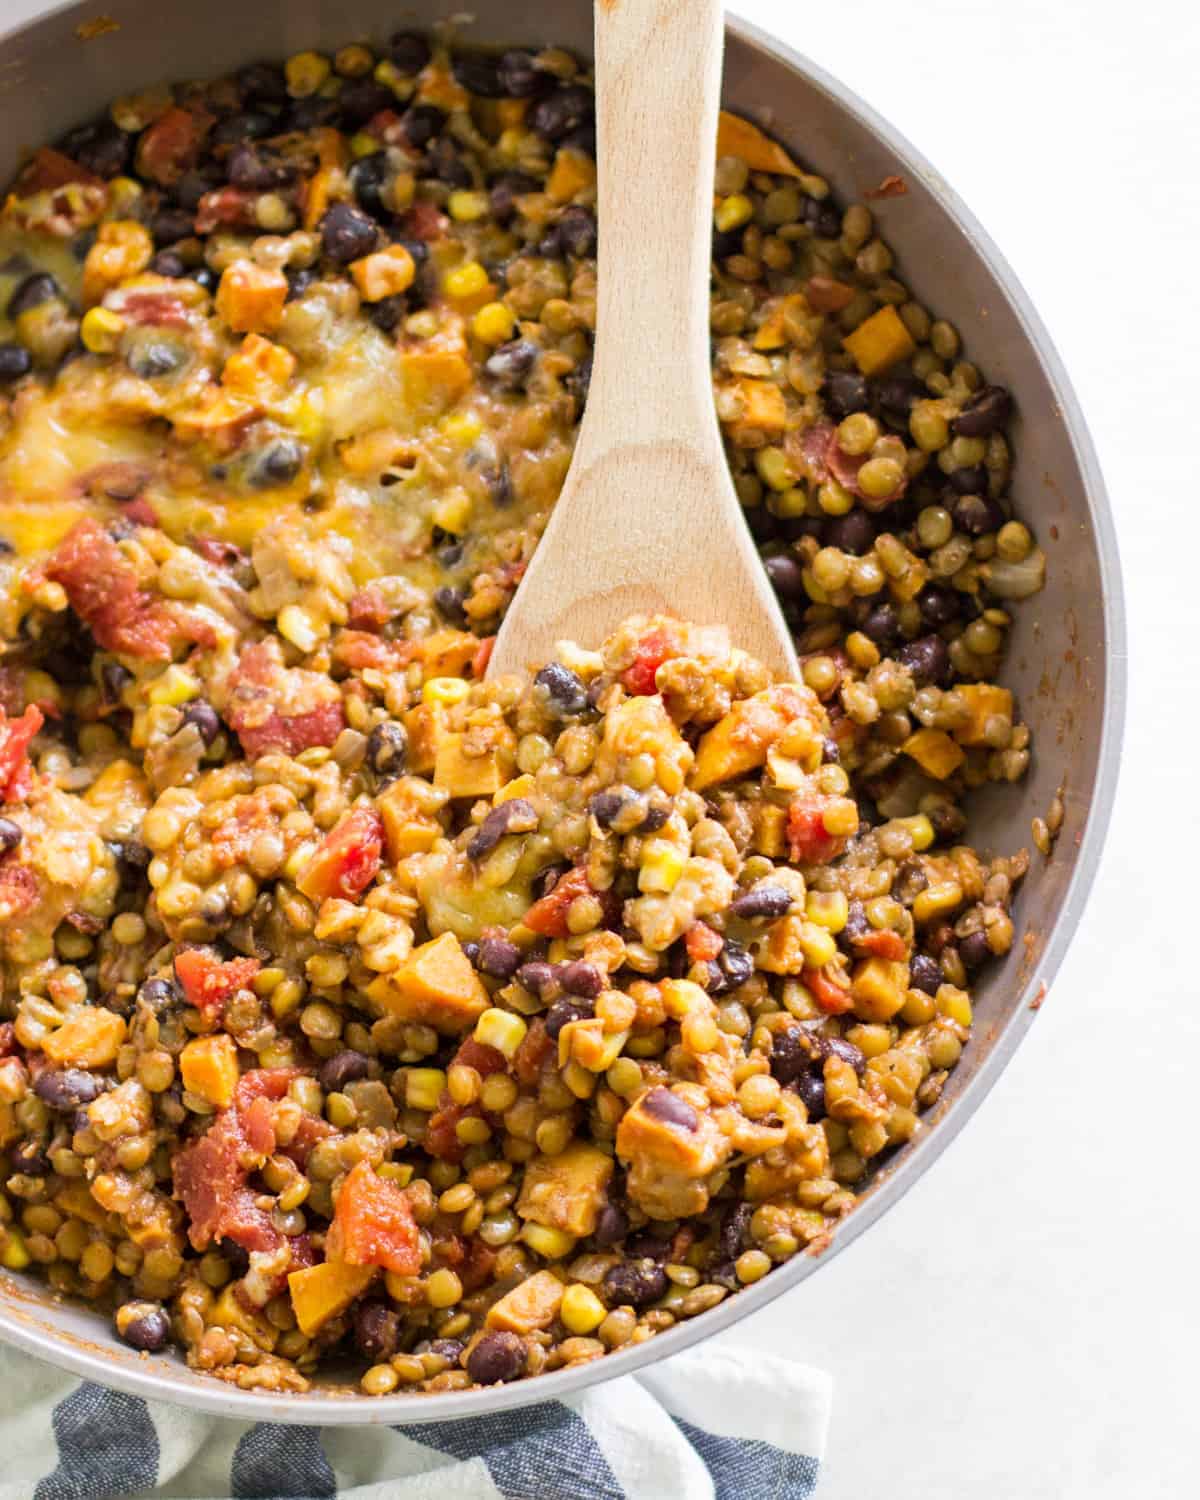 A close up look at the Mexican lentils in a skillet with a large wooden spoon